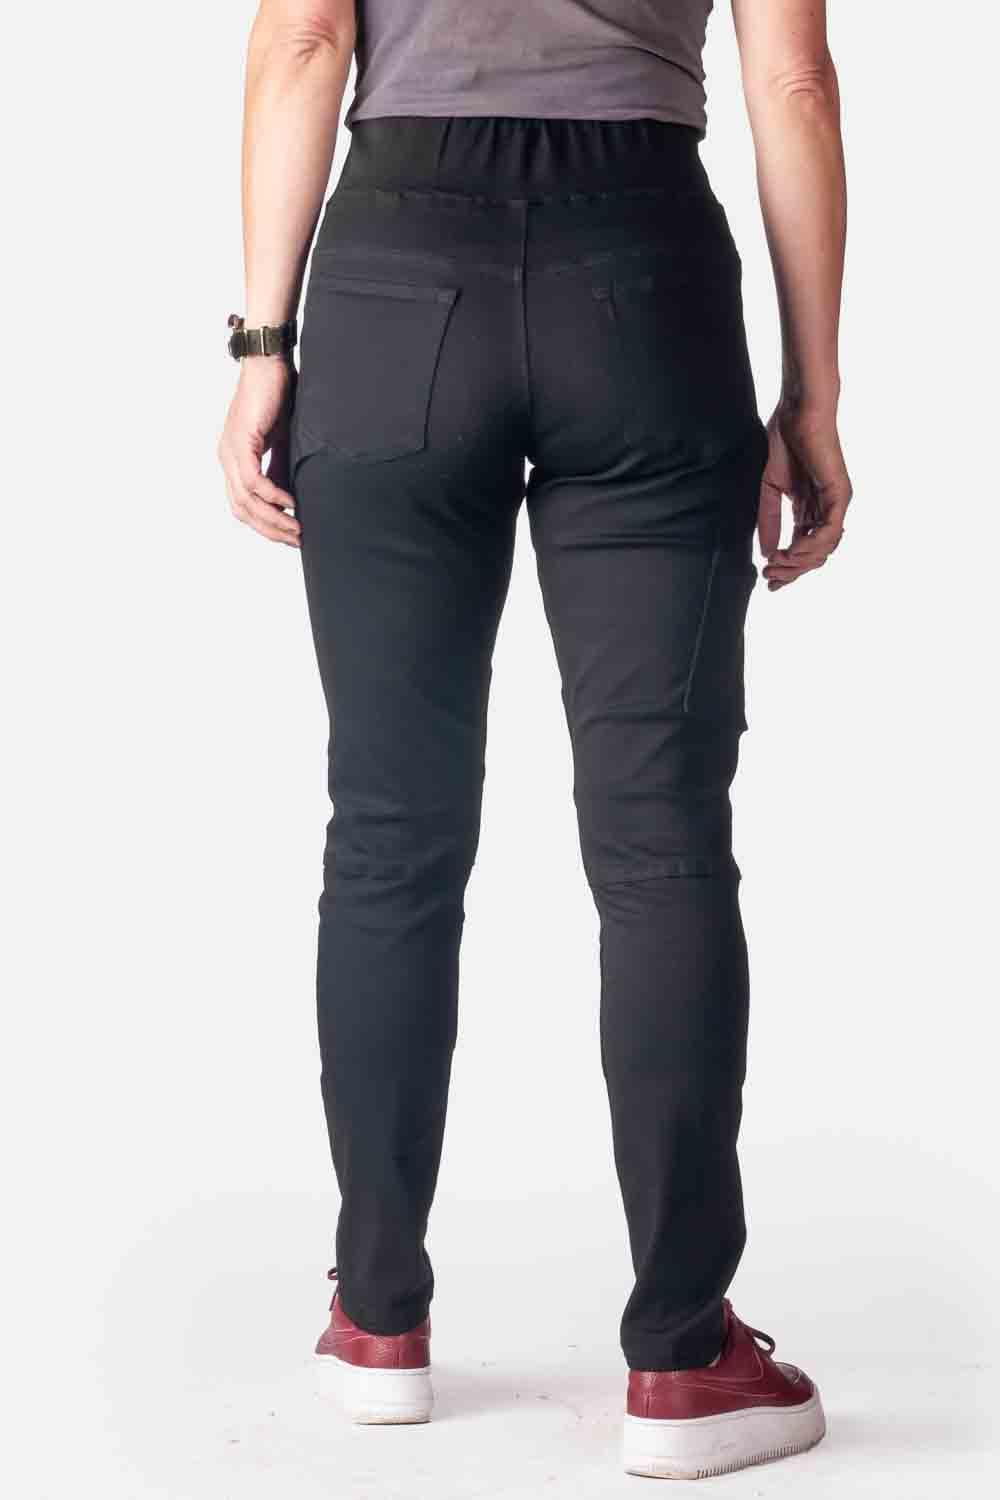 Dovetail Workwear Women's Black Work Pants (6/8 X 31) in the Pants